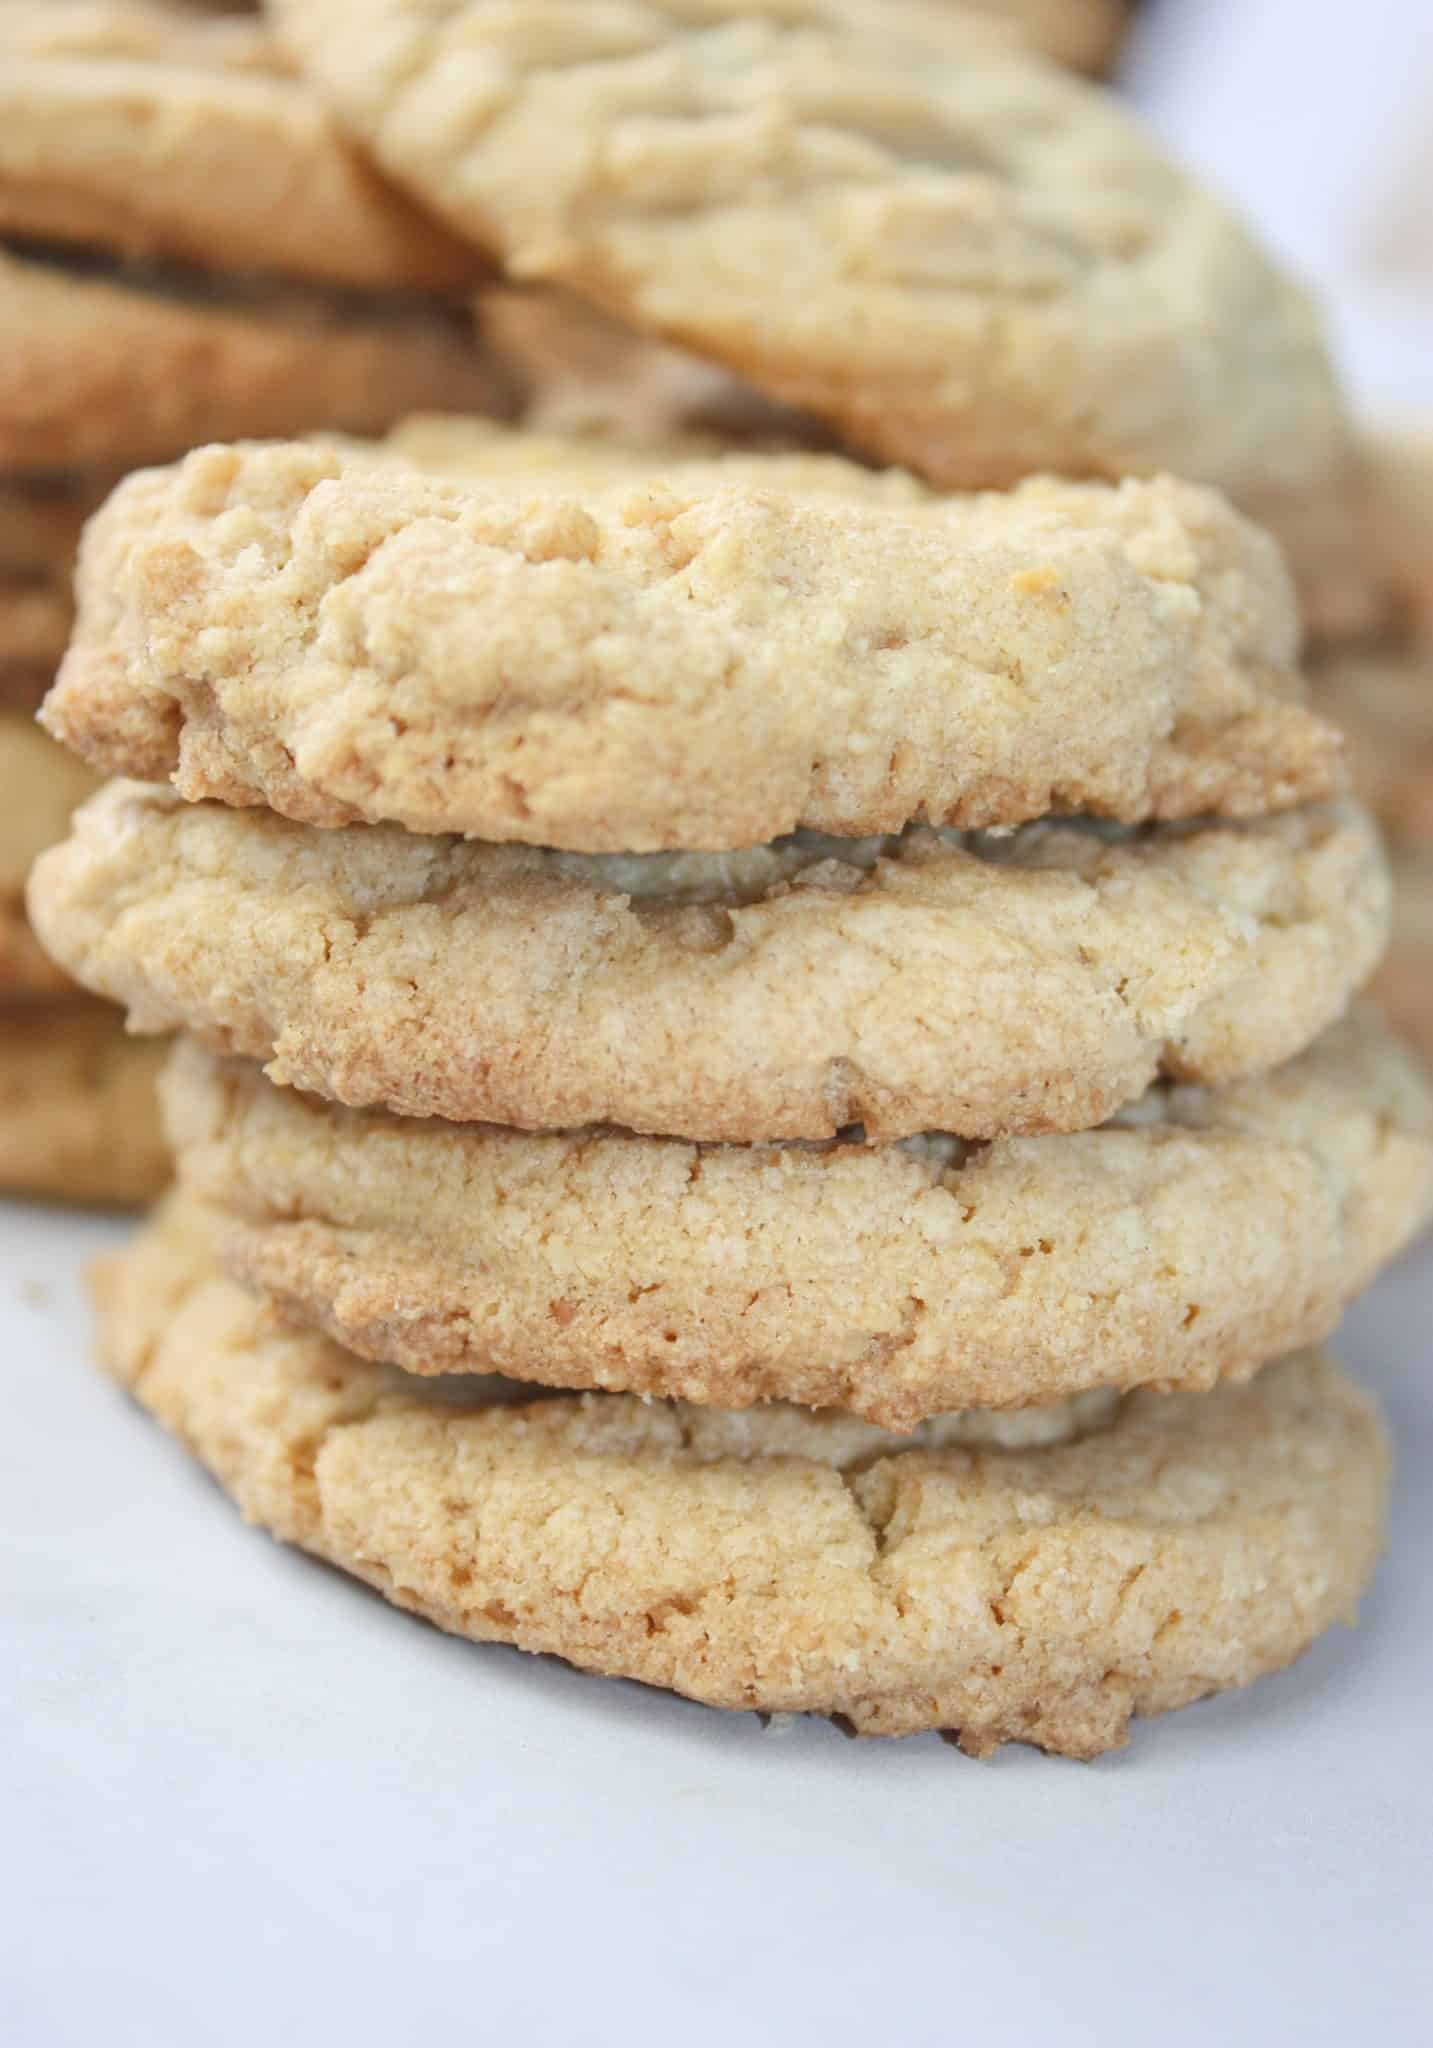 Peanut Butter Cookies 1 to 1 Flour is an easy gluten free cookie recipe.  These cookies are the perfect dessert for peanut butter lovers because they incorporate natual peanut butter to get that true peanut taste!